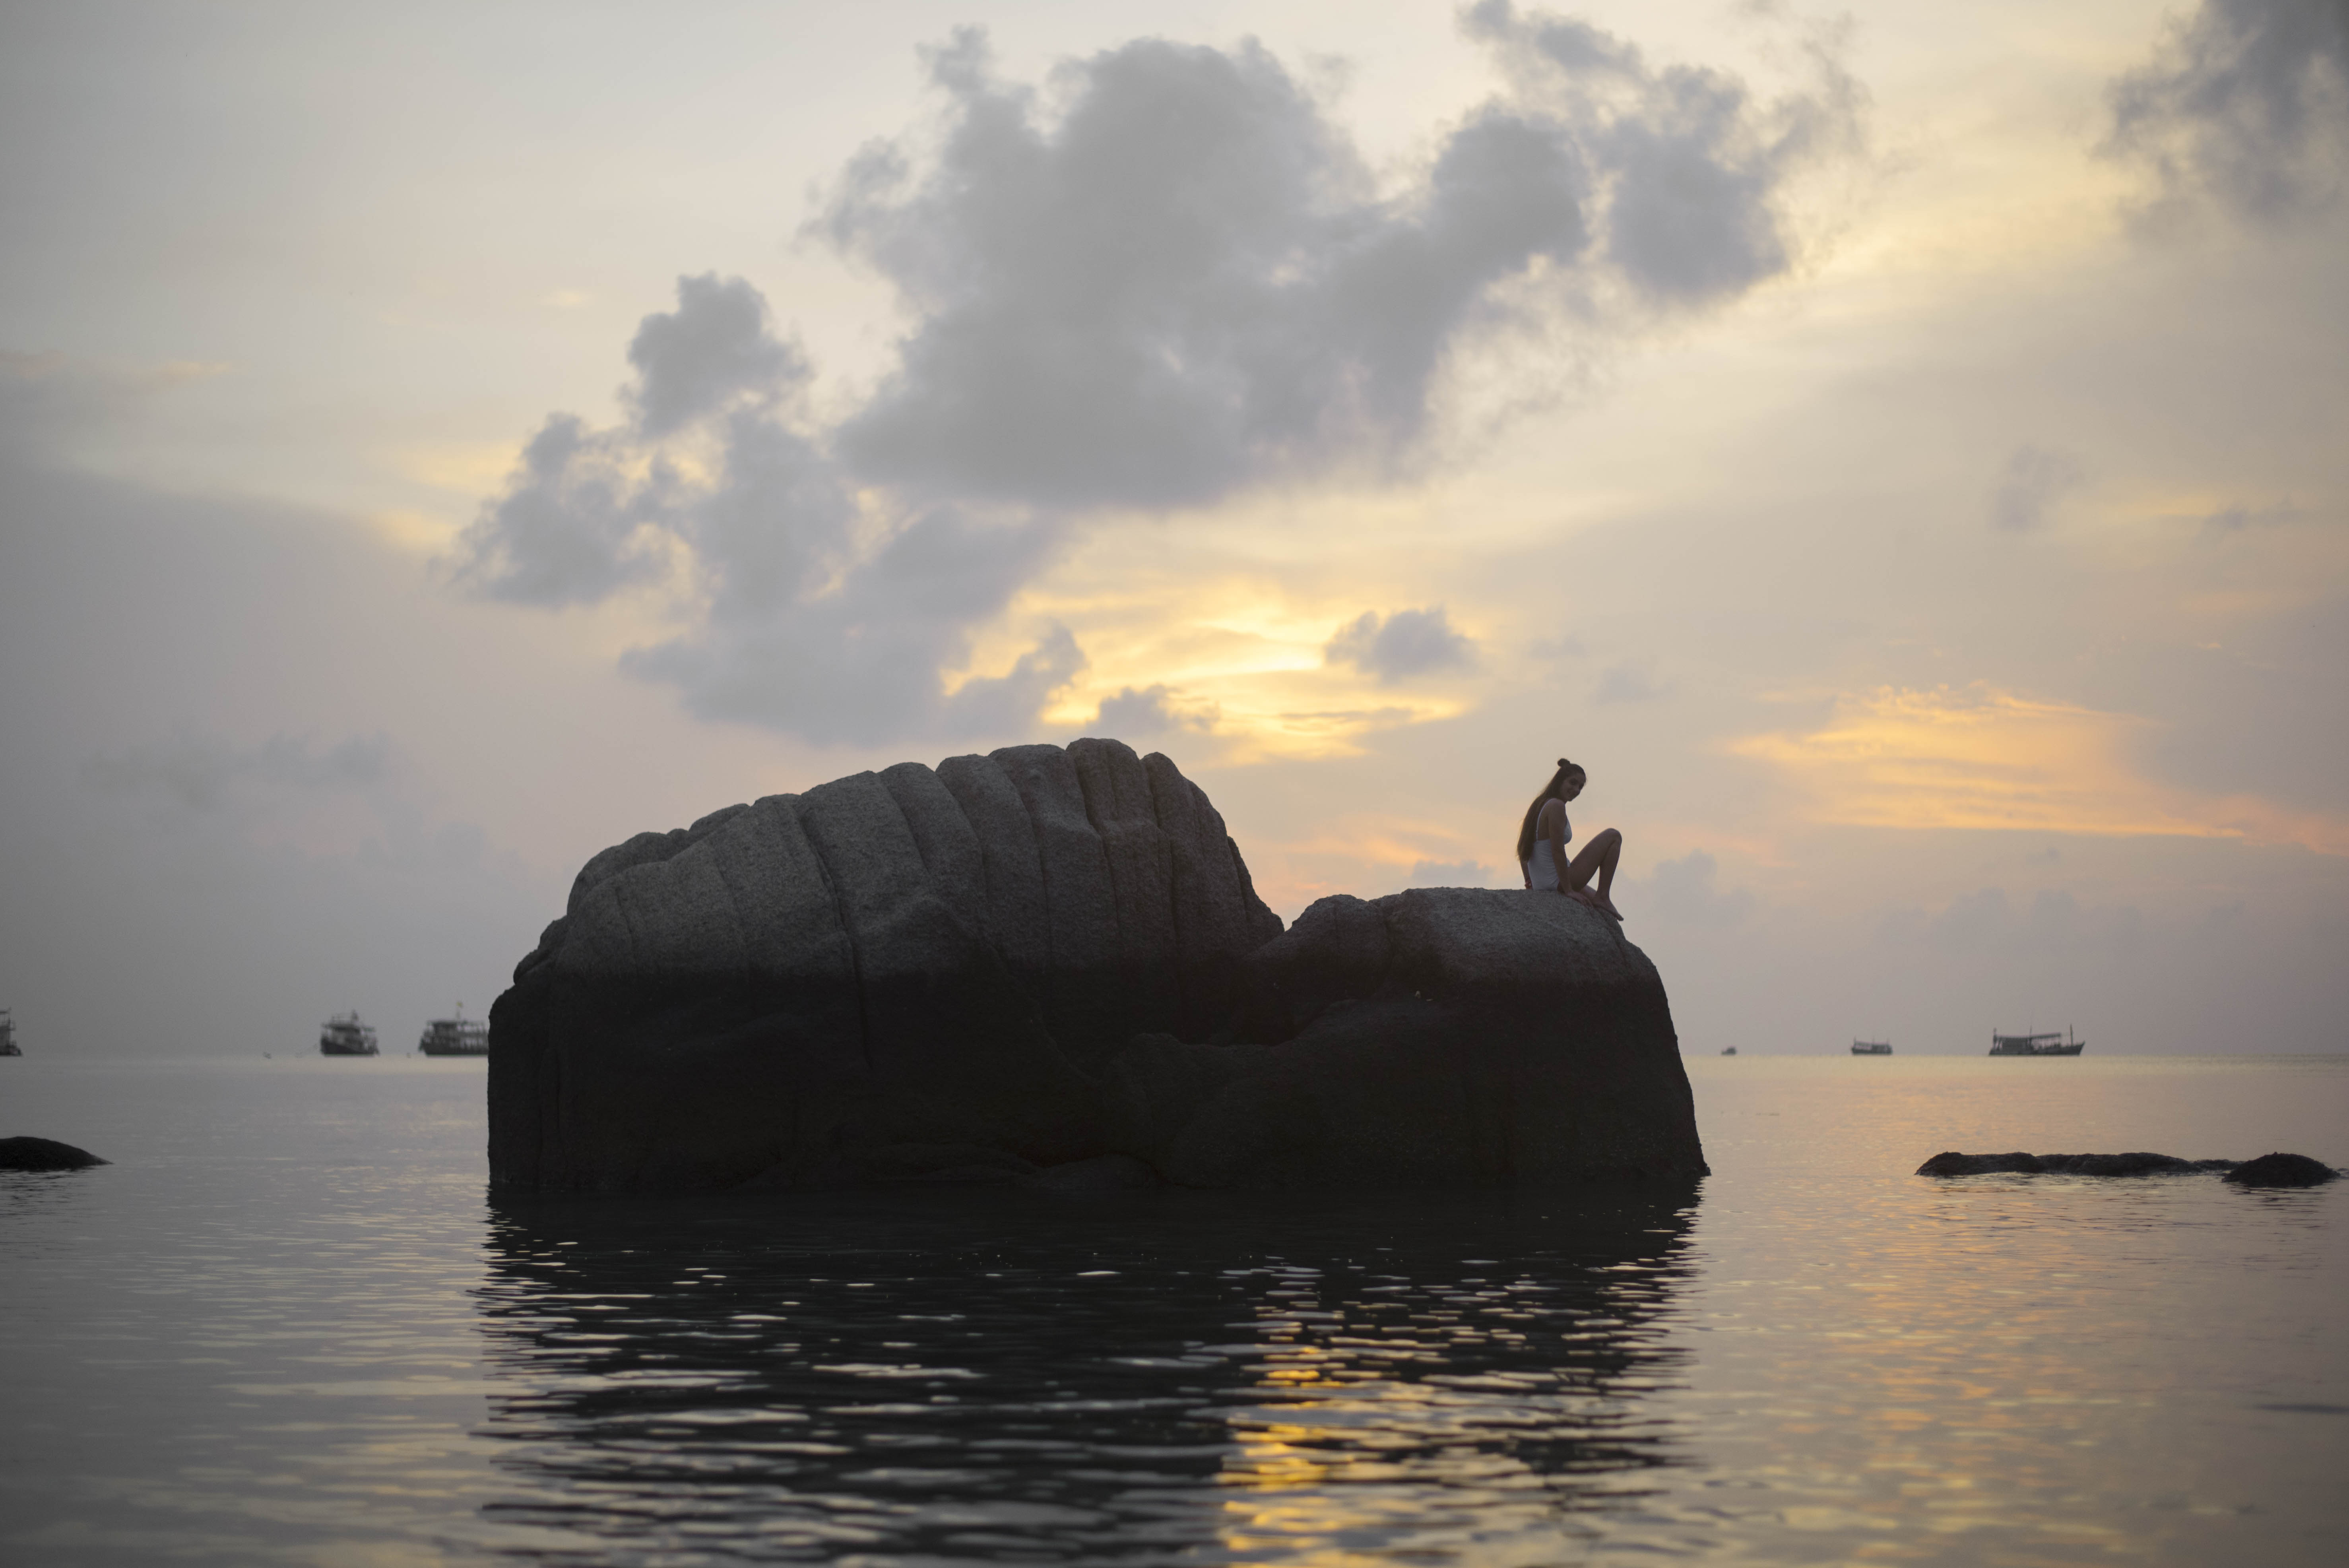 That magic sunset in Koh thao.